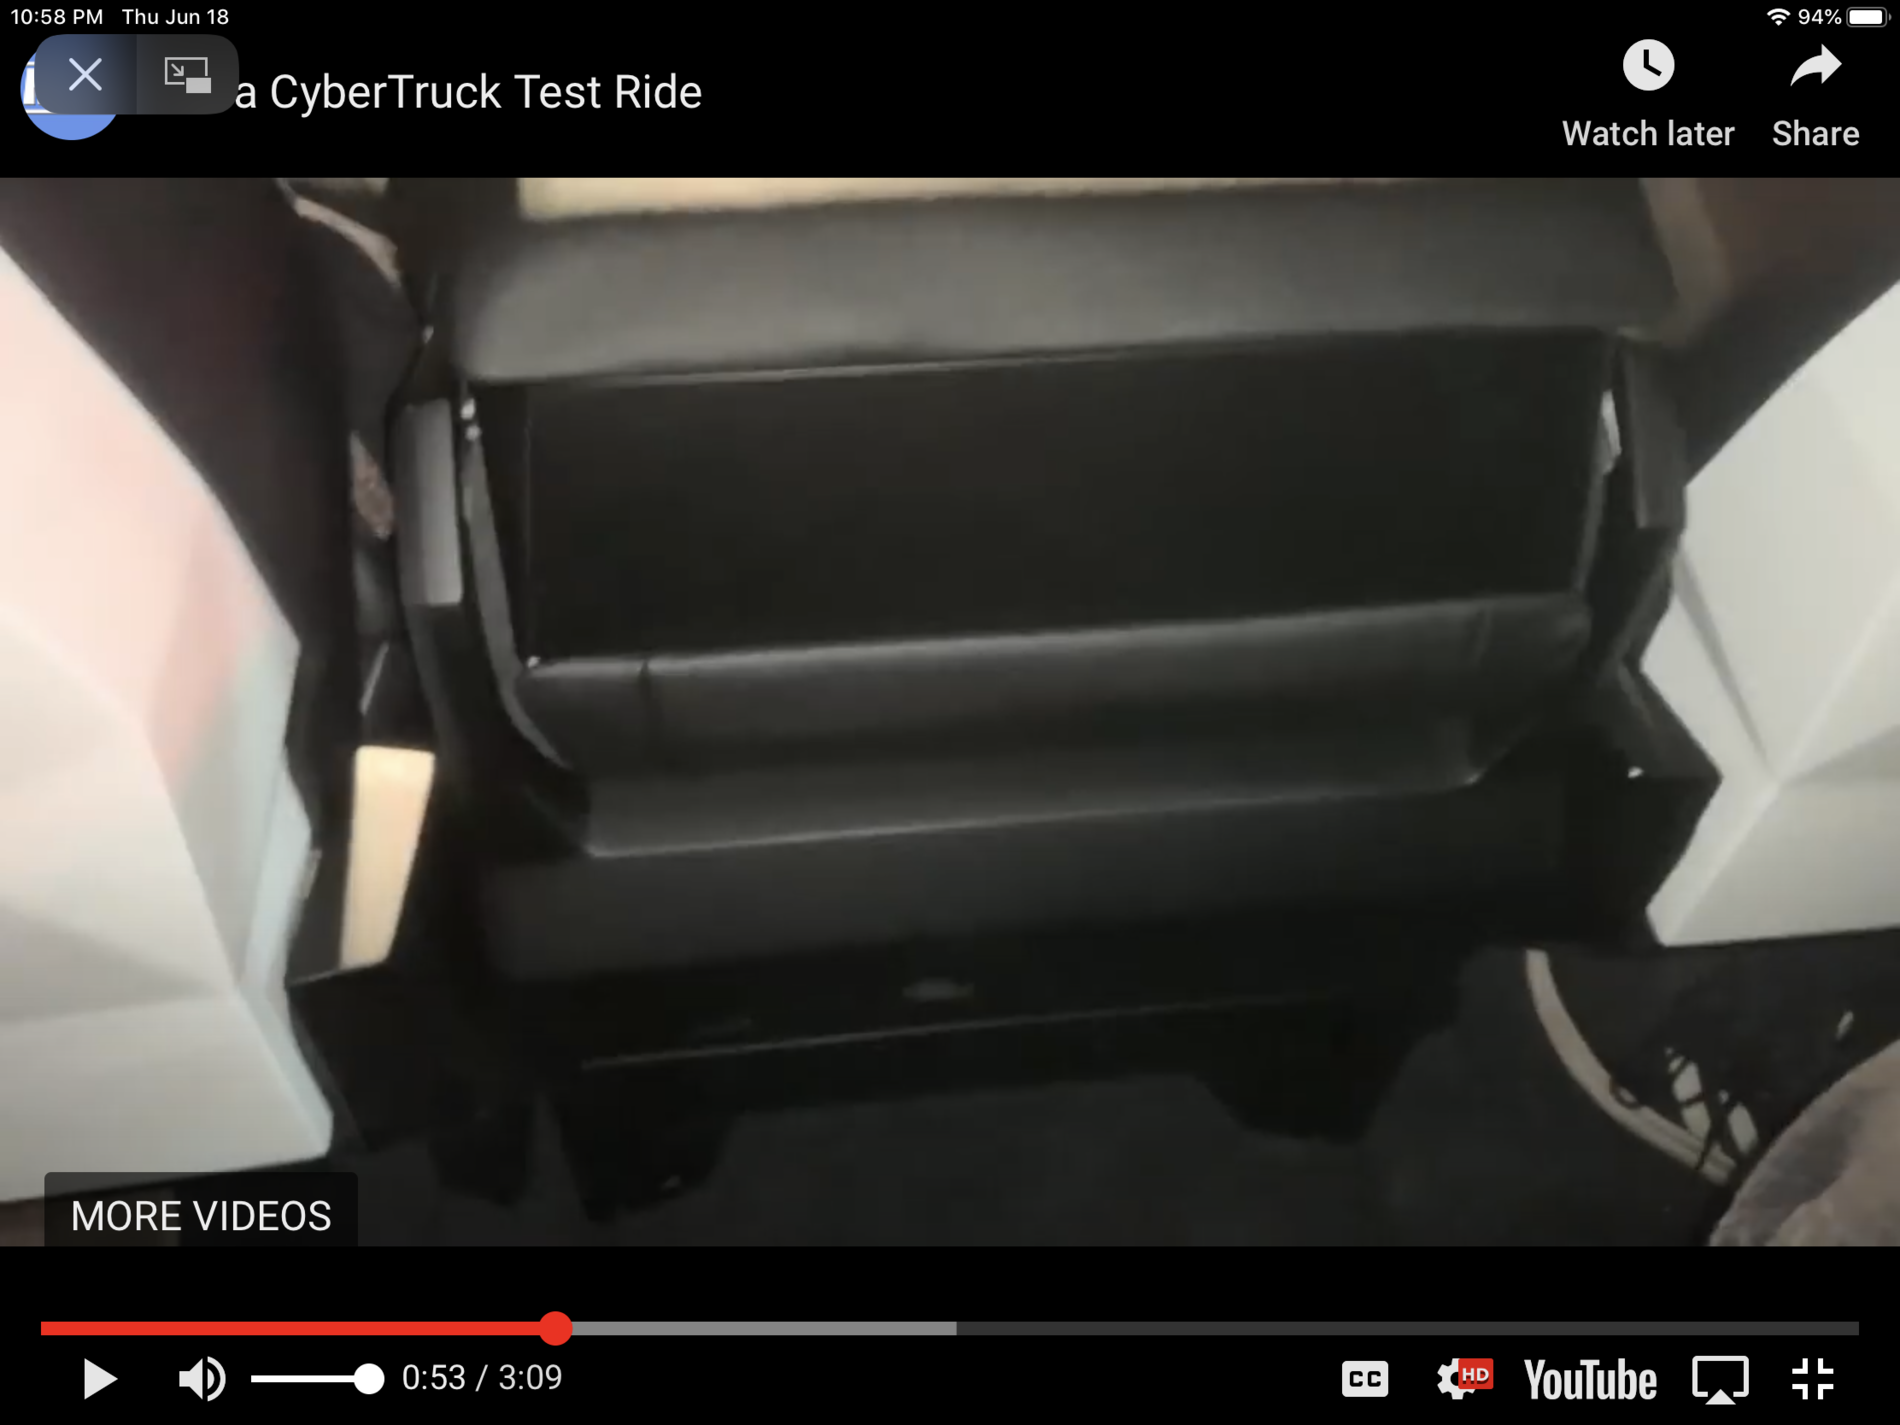 Tesla Cybertruck Cybertruck Interior Compared to Competitors (Sandy Munro Series) EBE2E305-AF17-4751-B9A1-C3DDBF4EAAA6